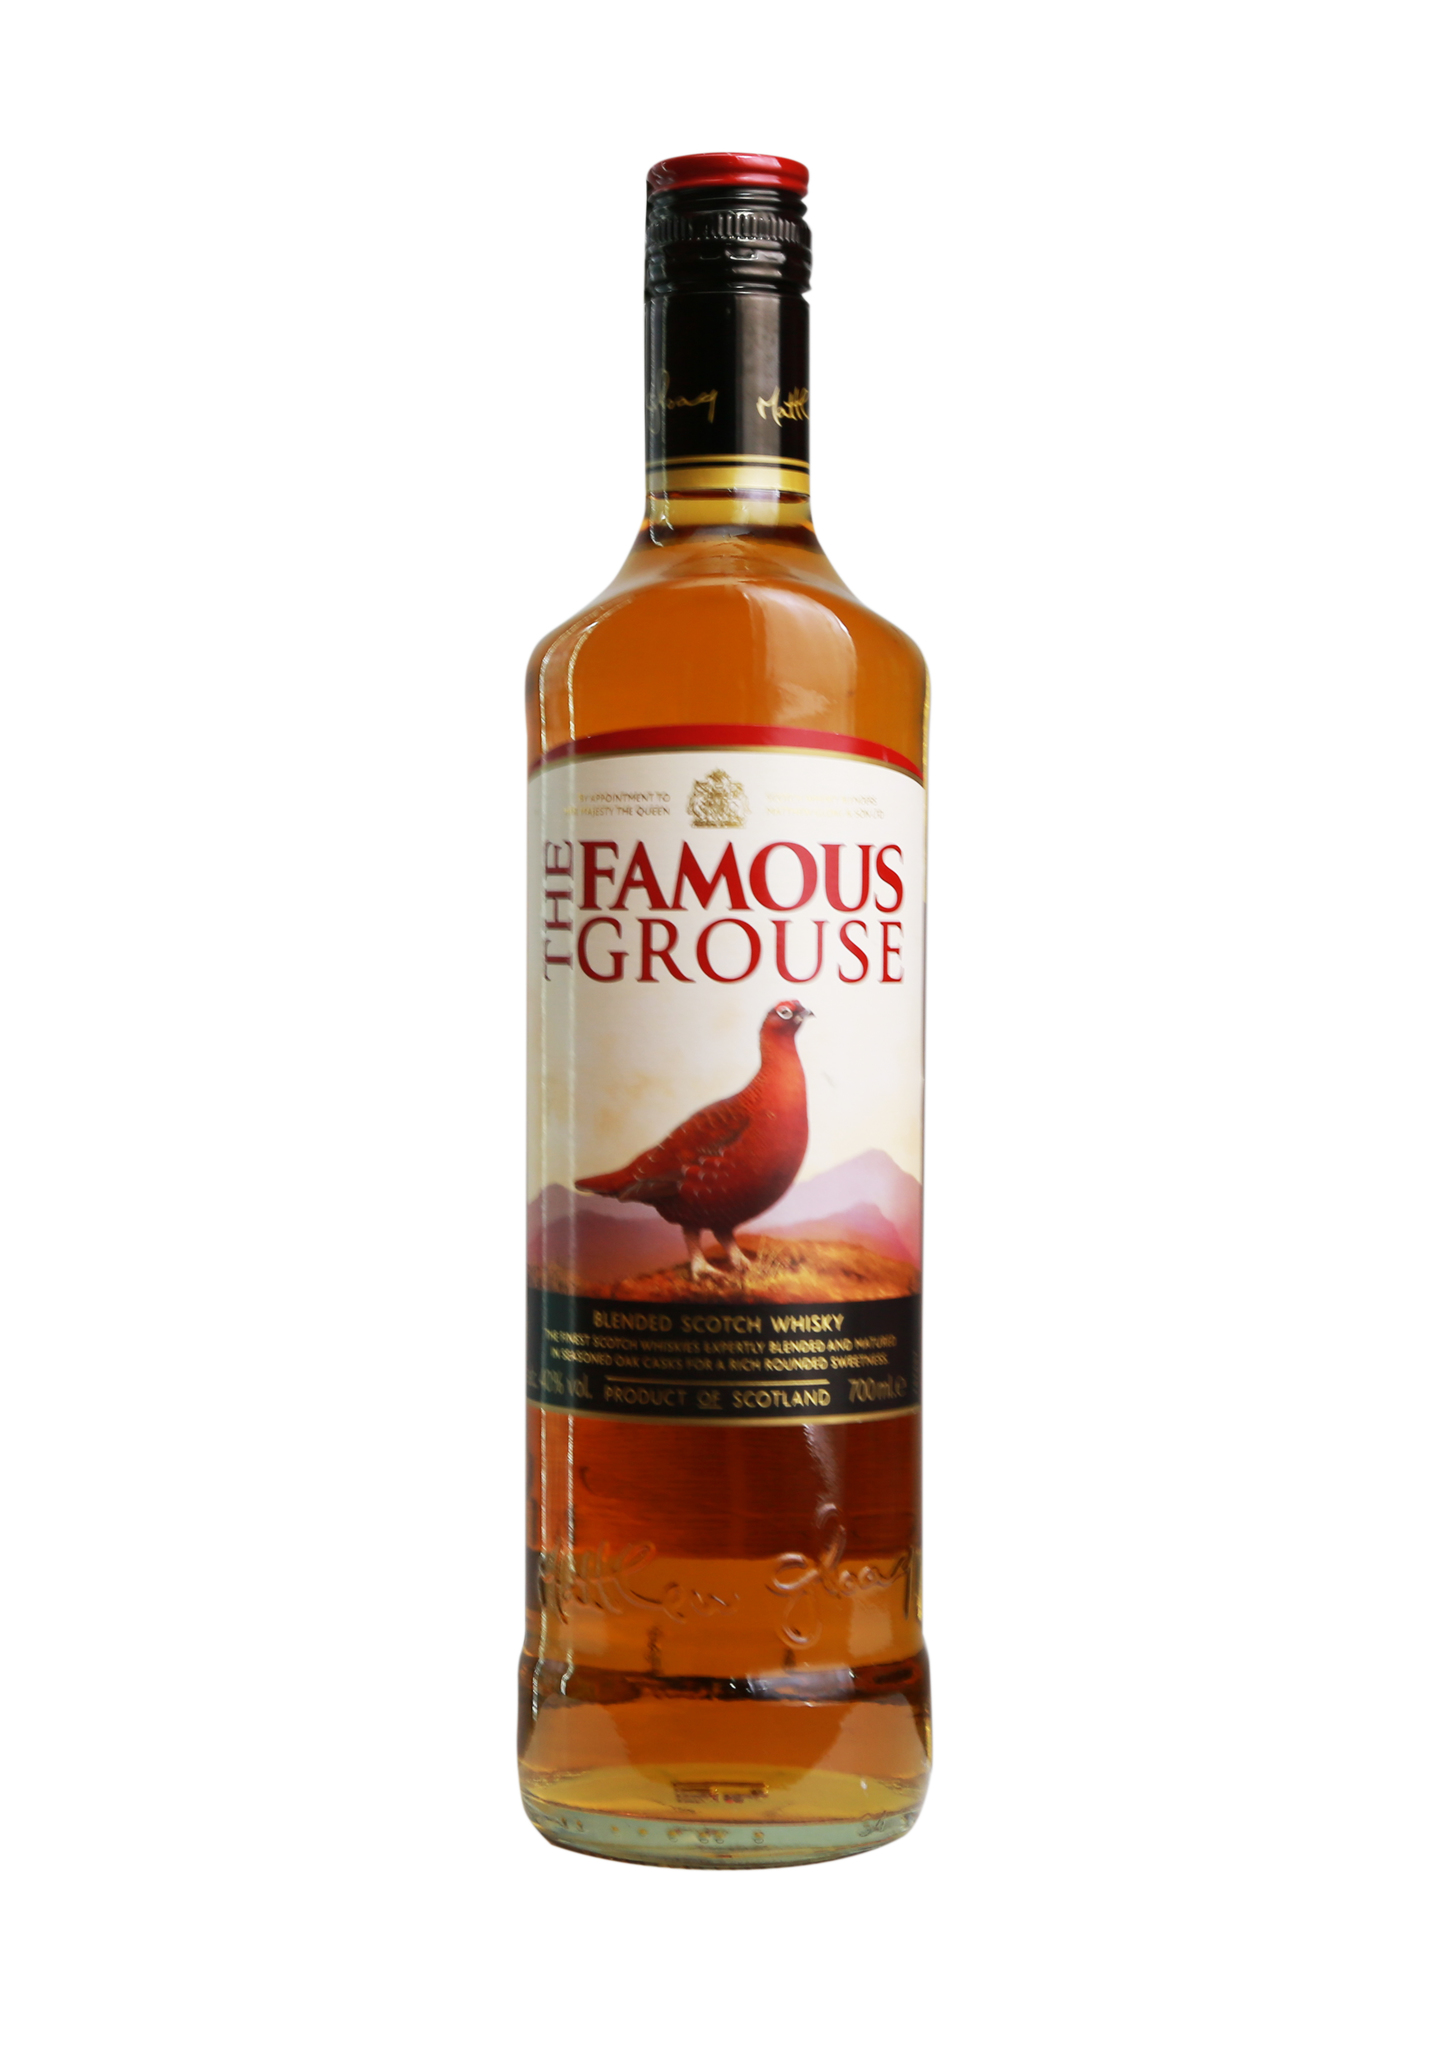 Виски The Famous Grouse 40%